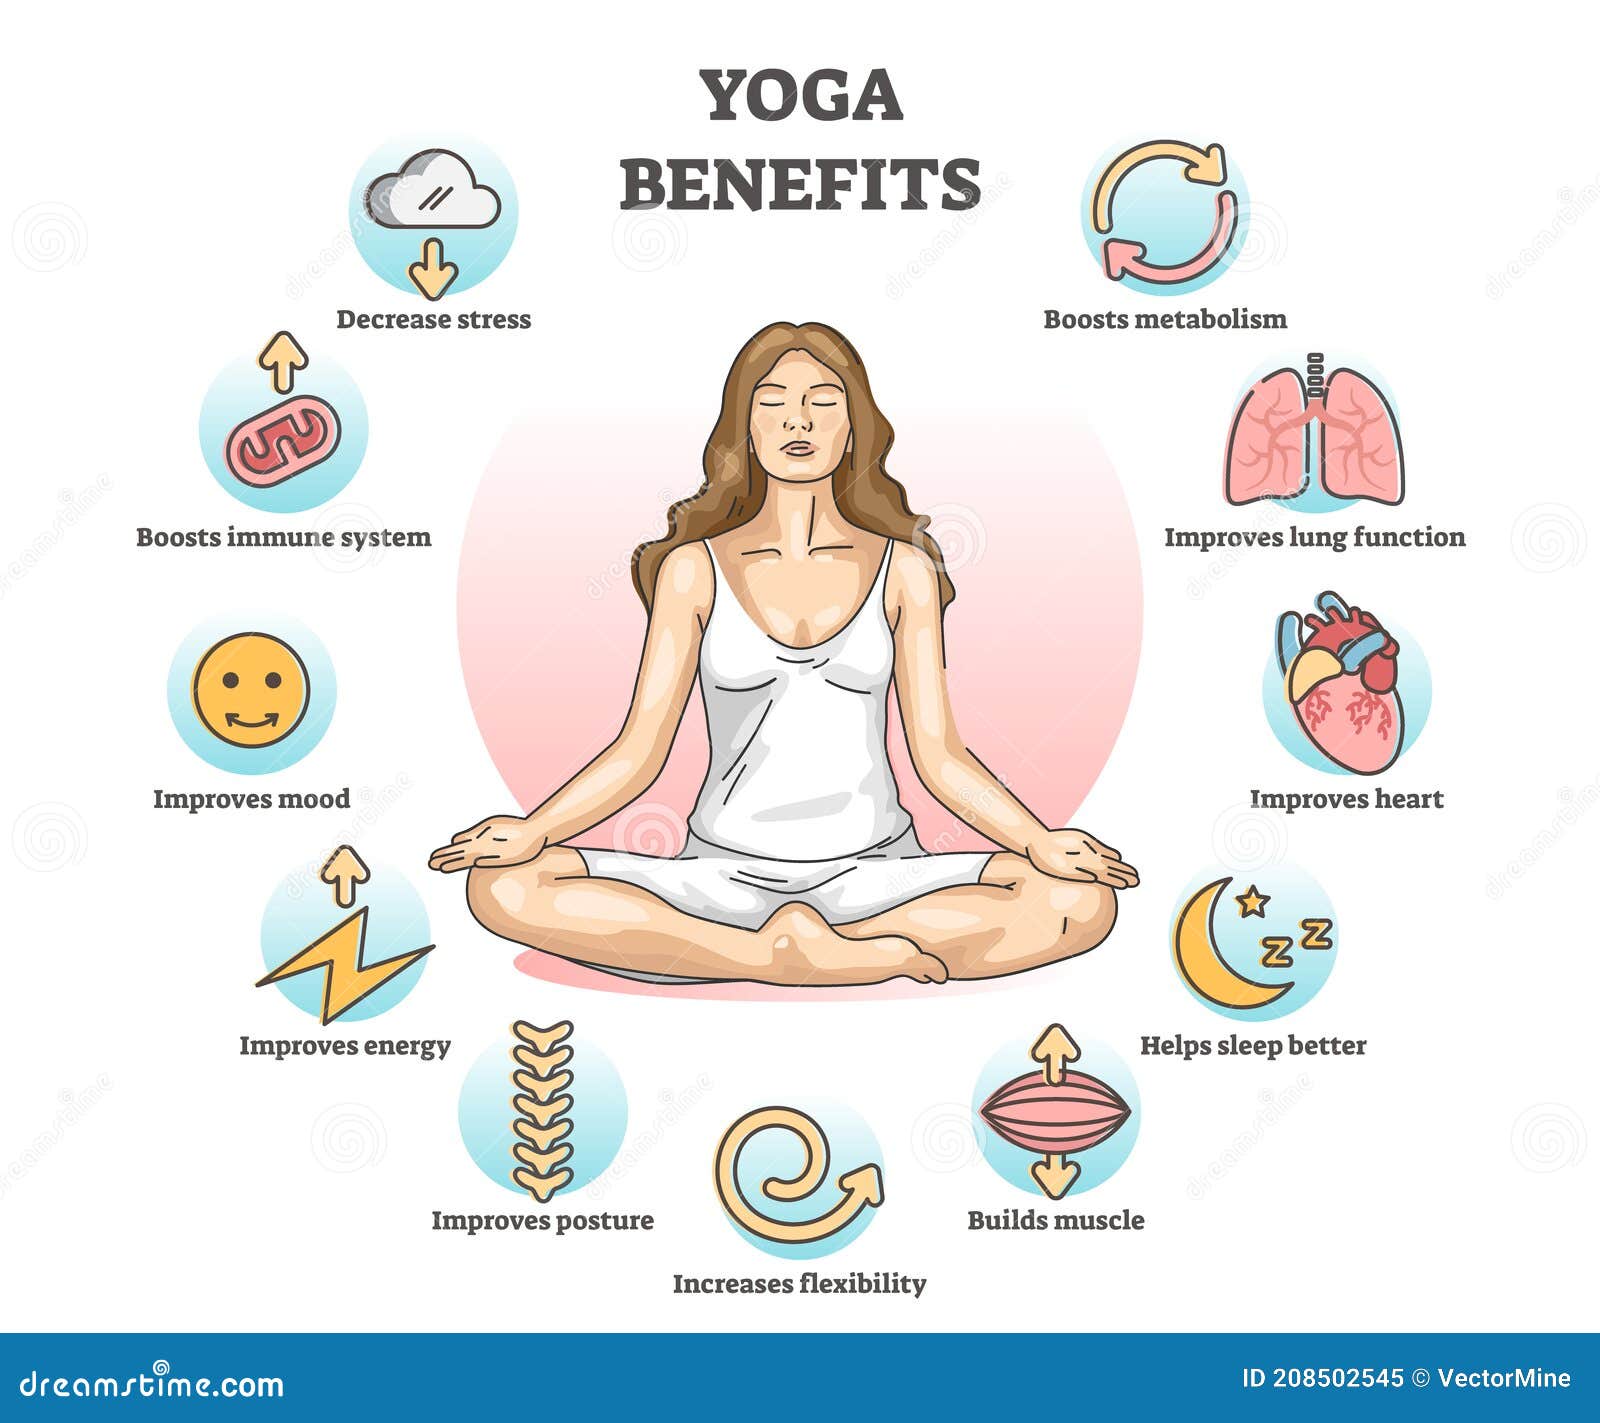 What Are the Health Benefits of Yoga for Women?